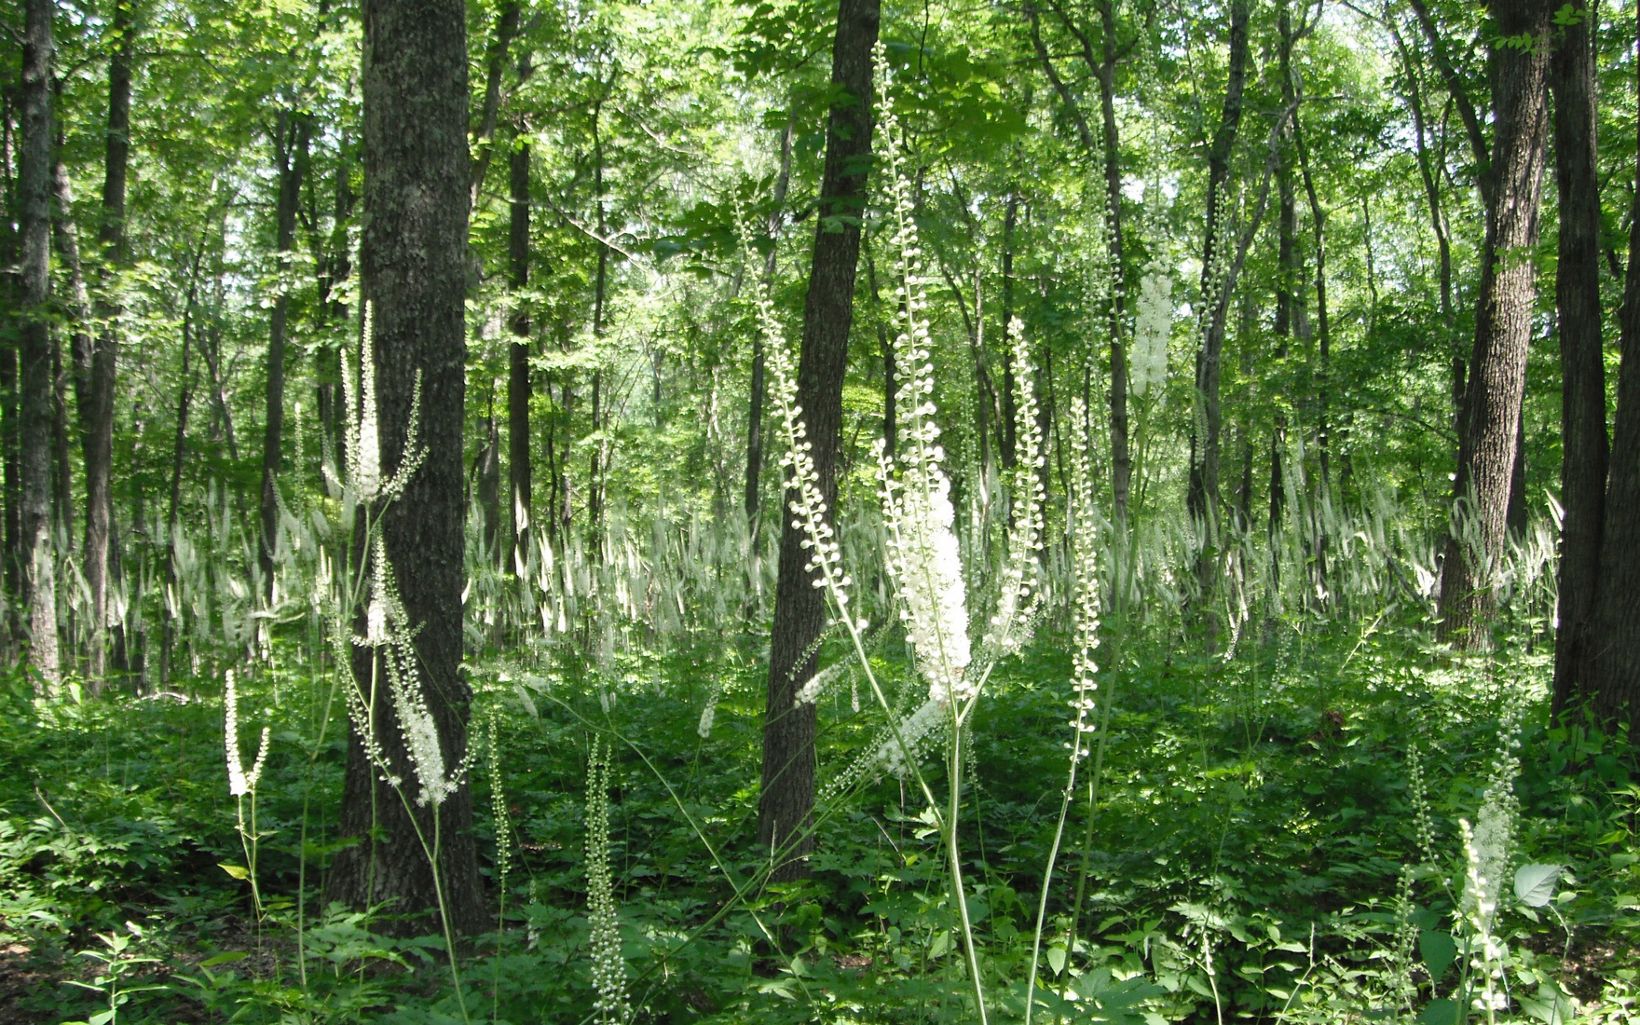 Black cohosh grows under the canopy of the trees